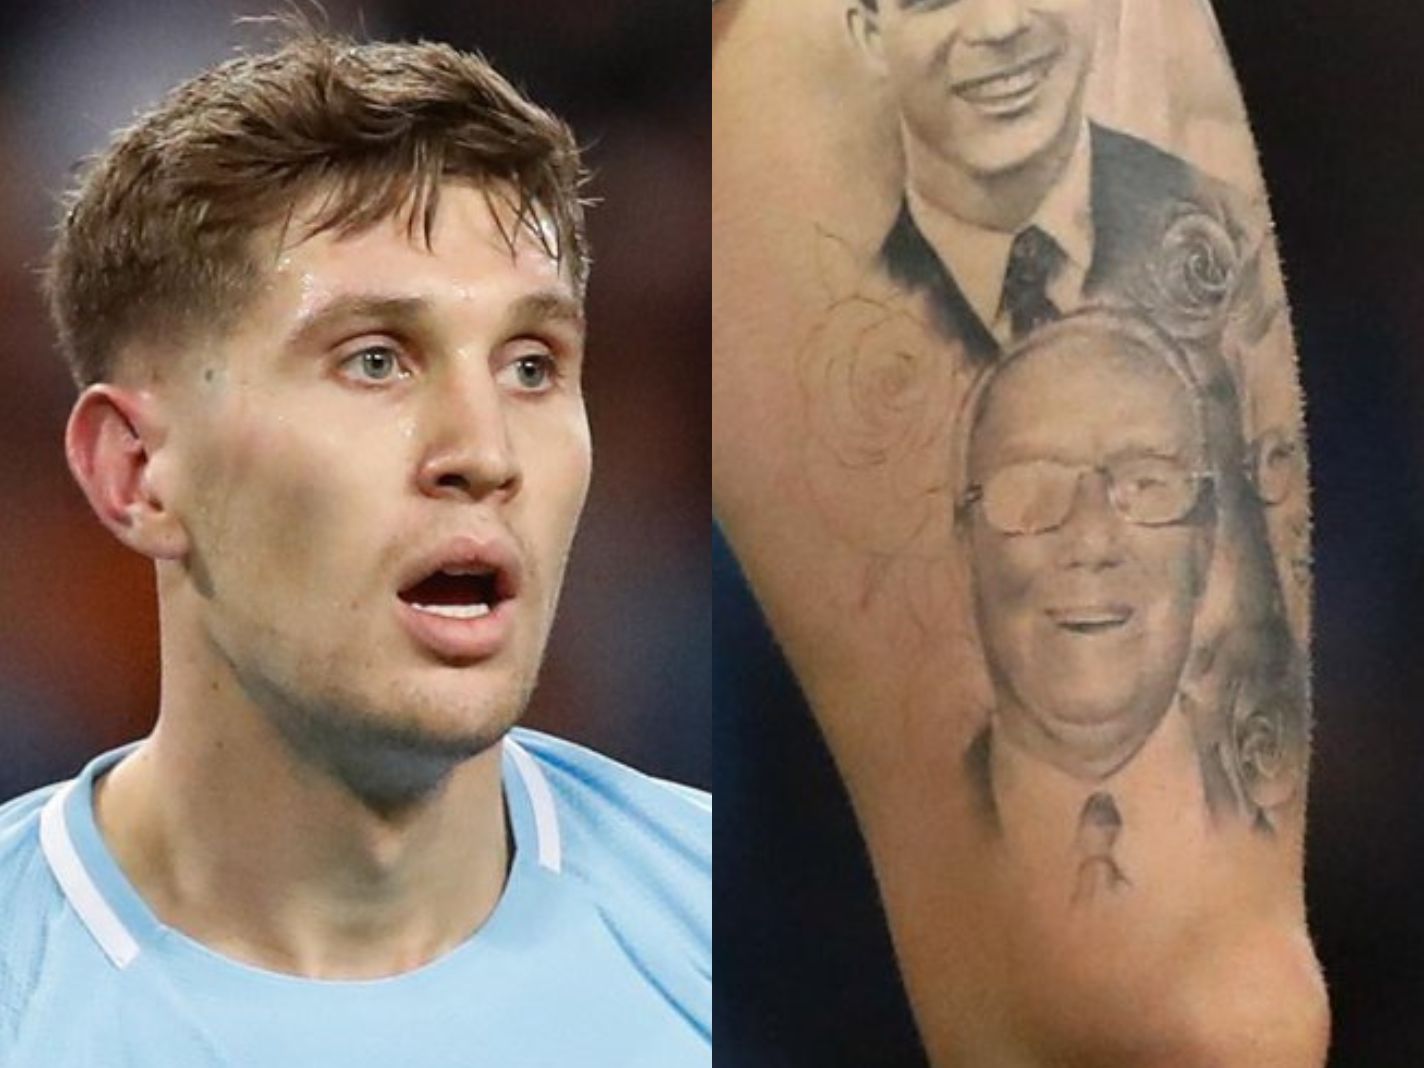 Fans Puzzled Over Faces John Stones Has Got Tattooed on His Thigh